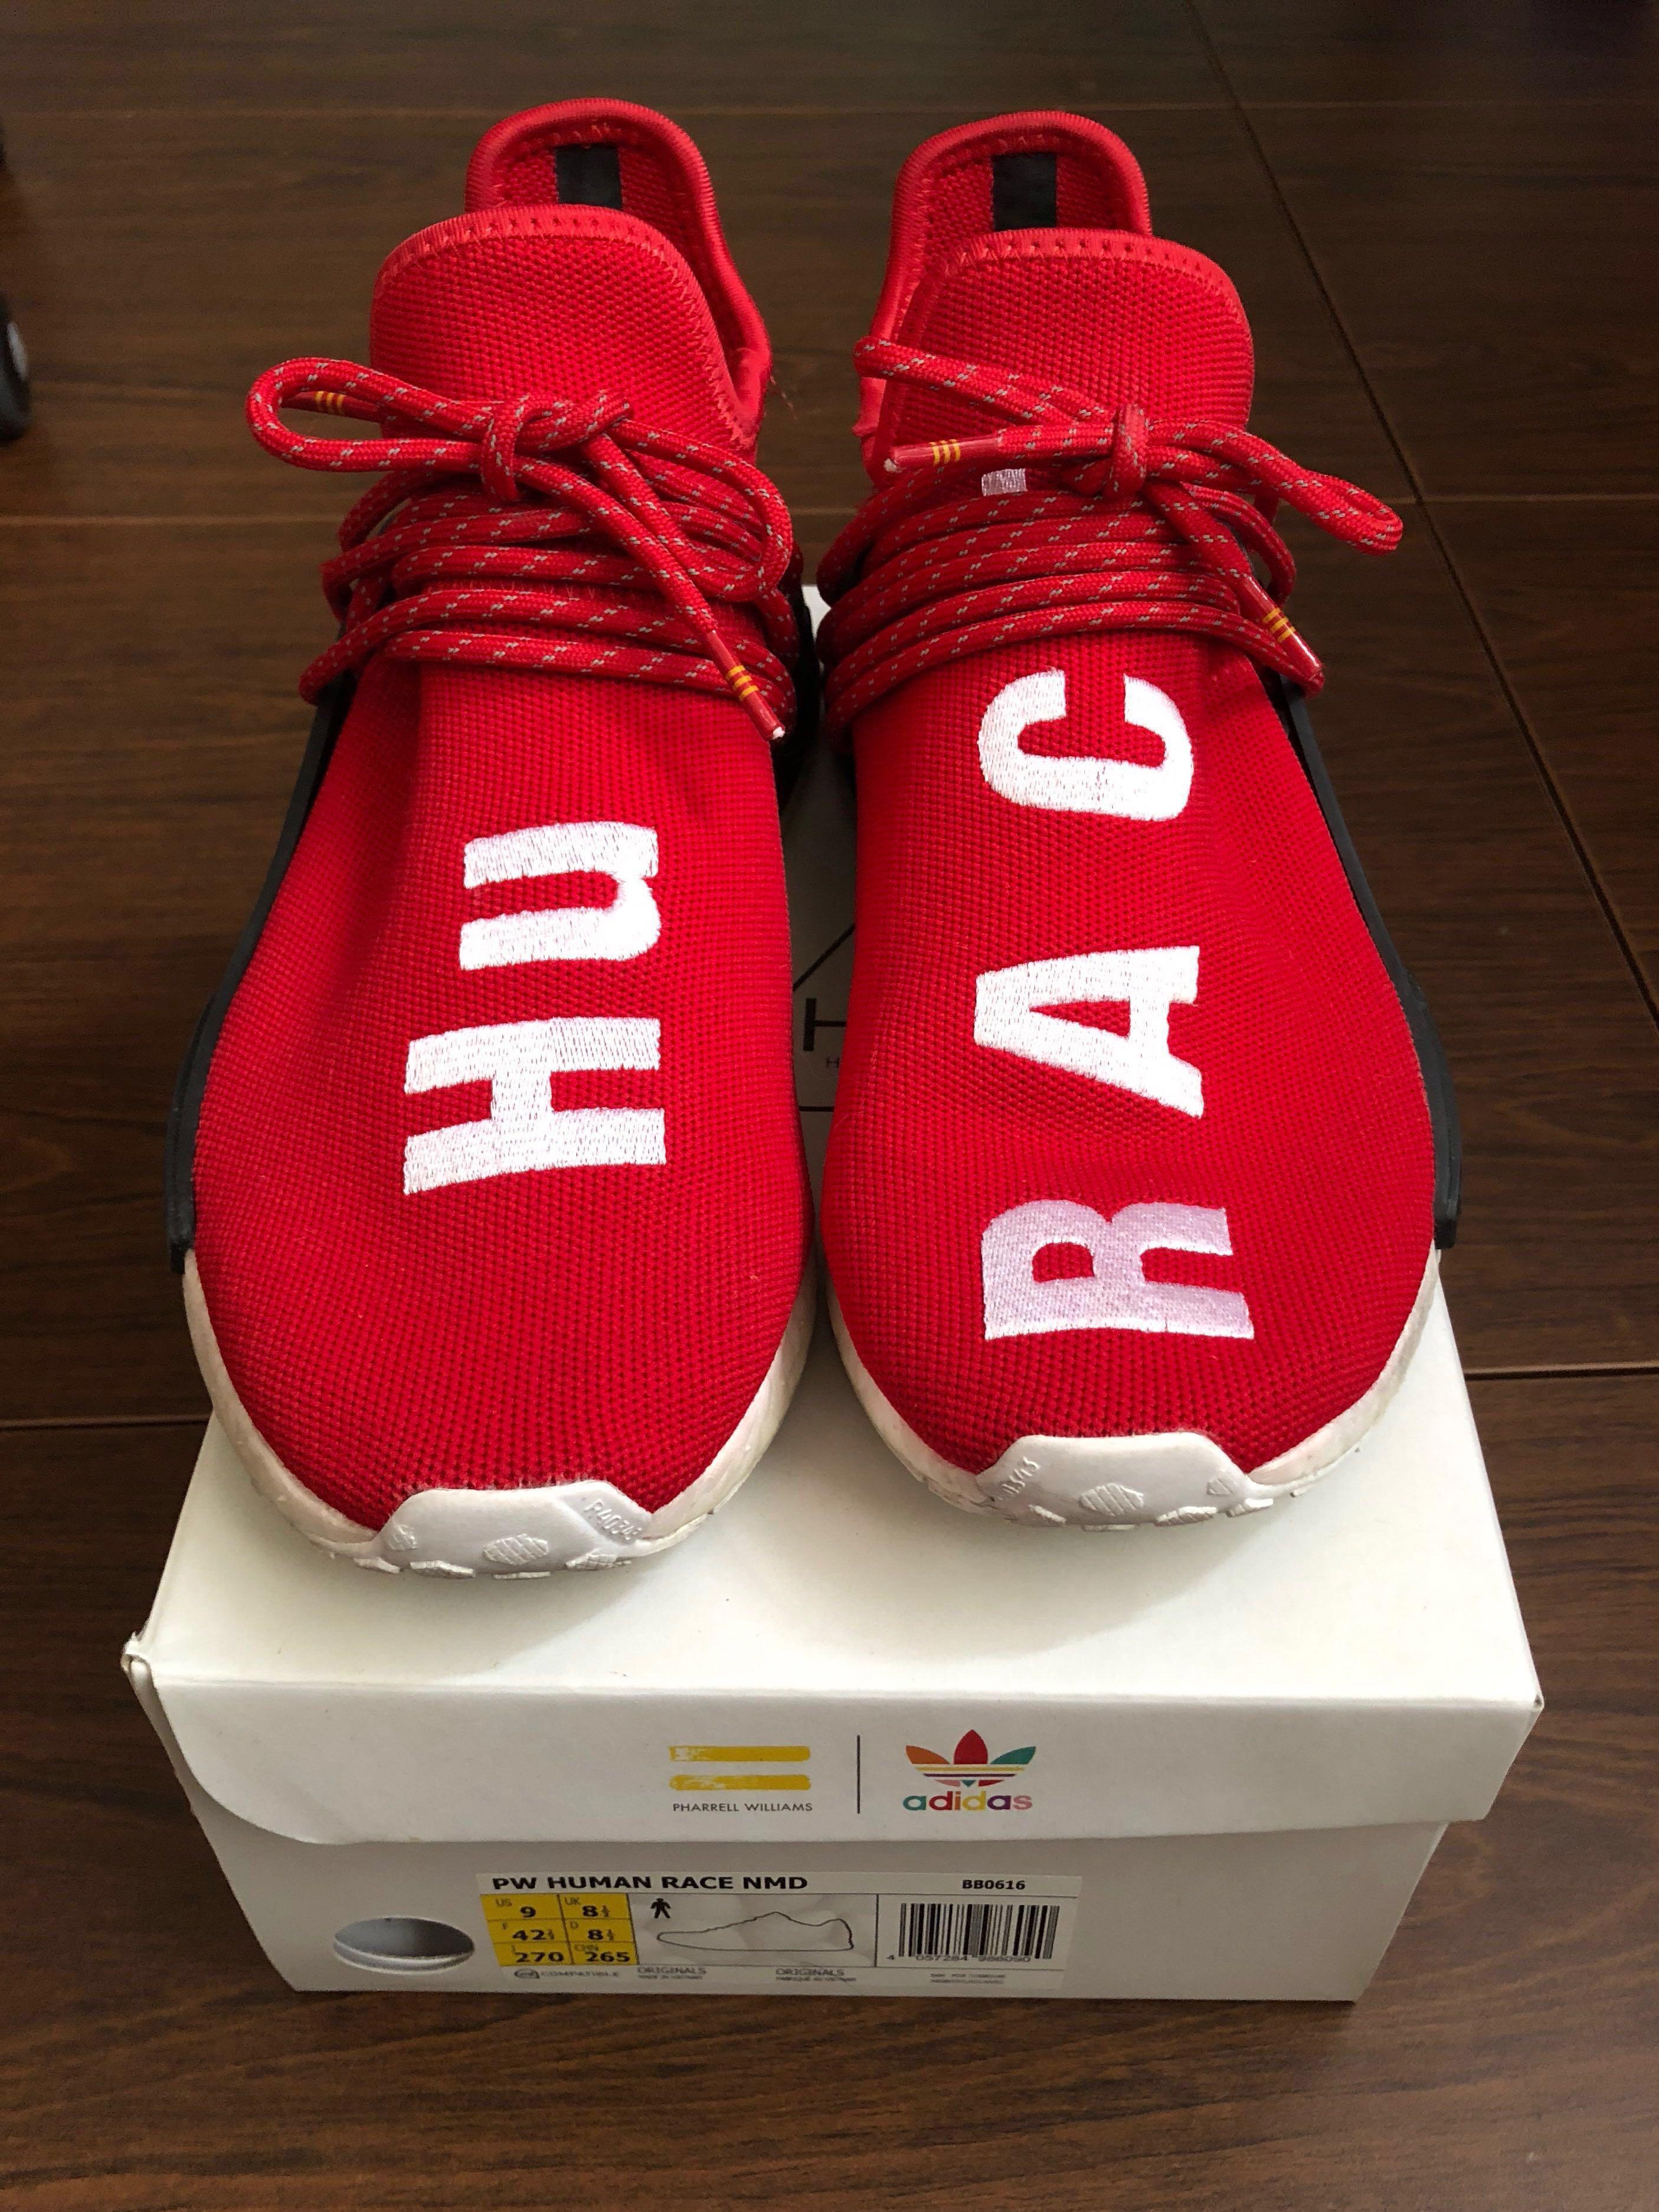 Look Out For The Pharrell x adidas NMD Hu N E R D Green